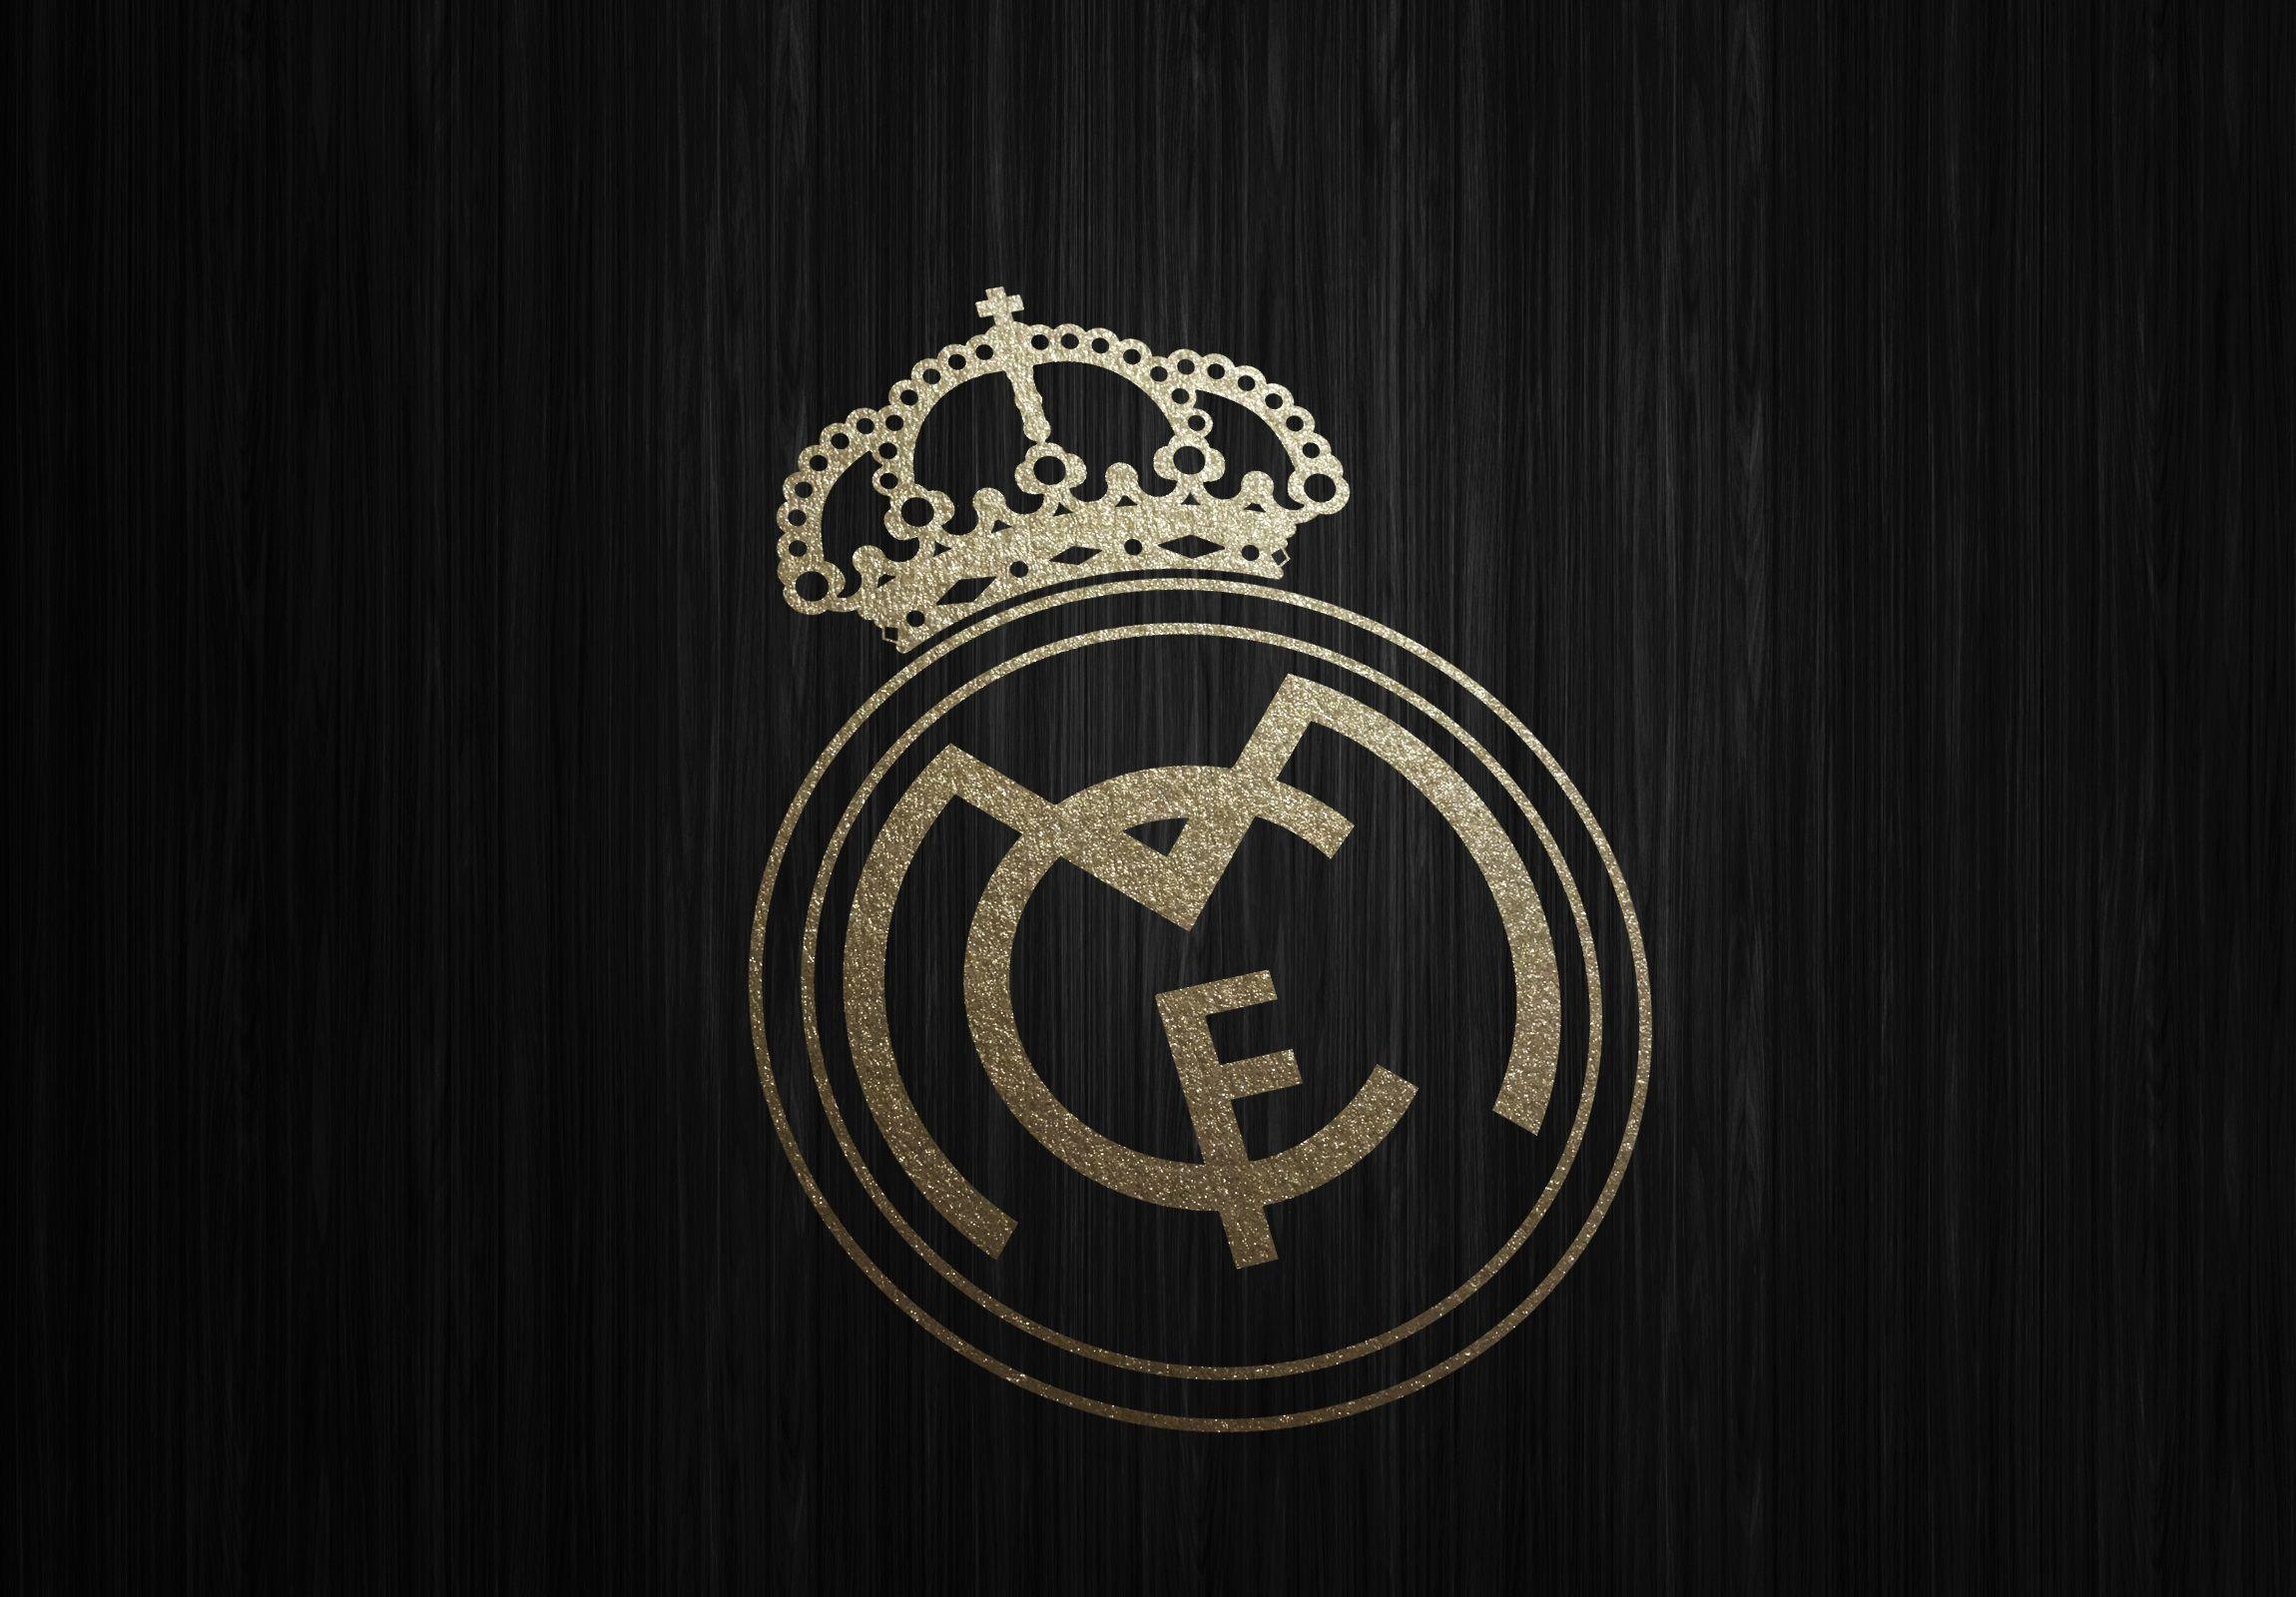 Real Madrid Wallpapers HD 2016